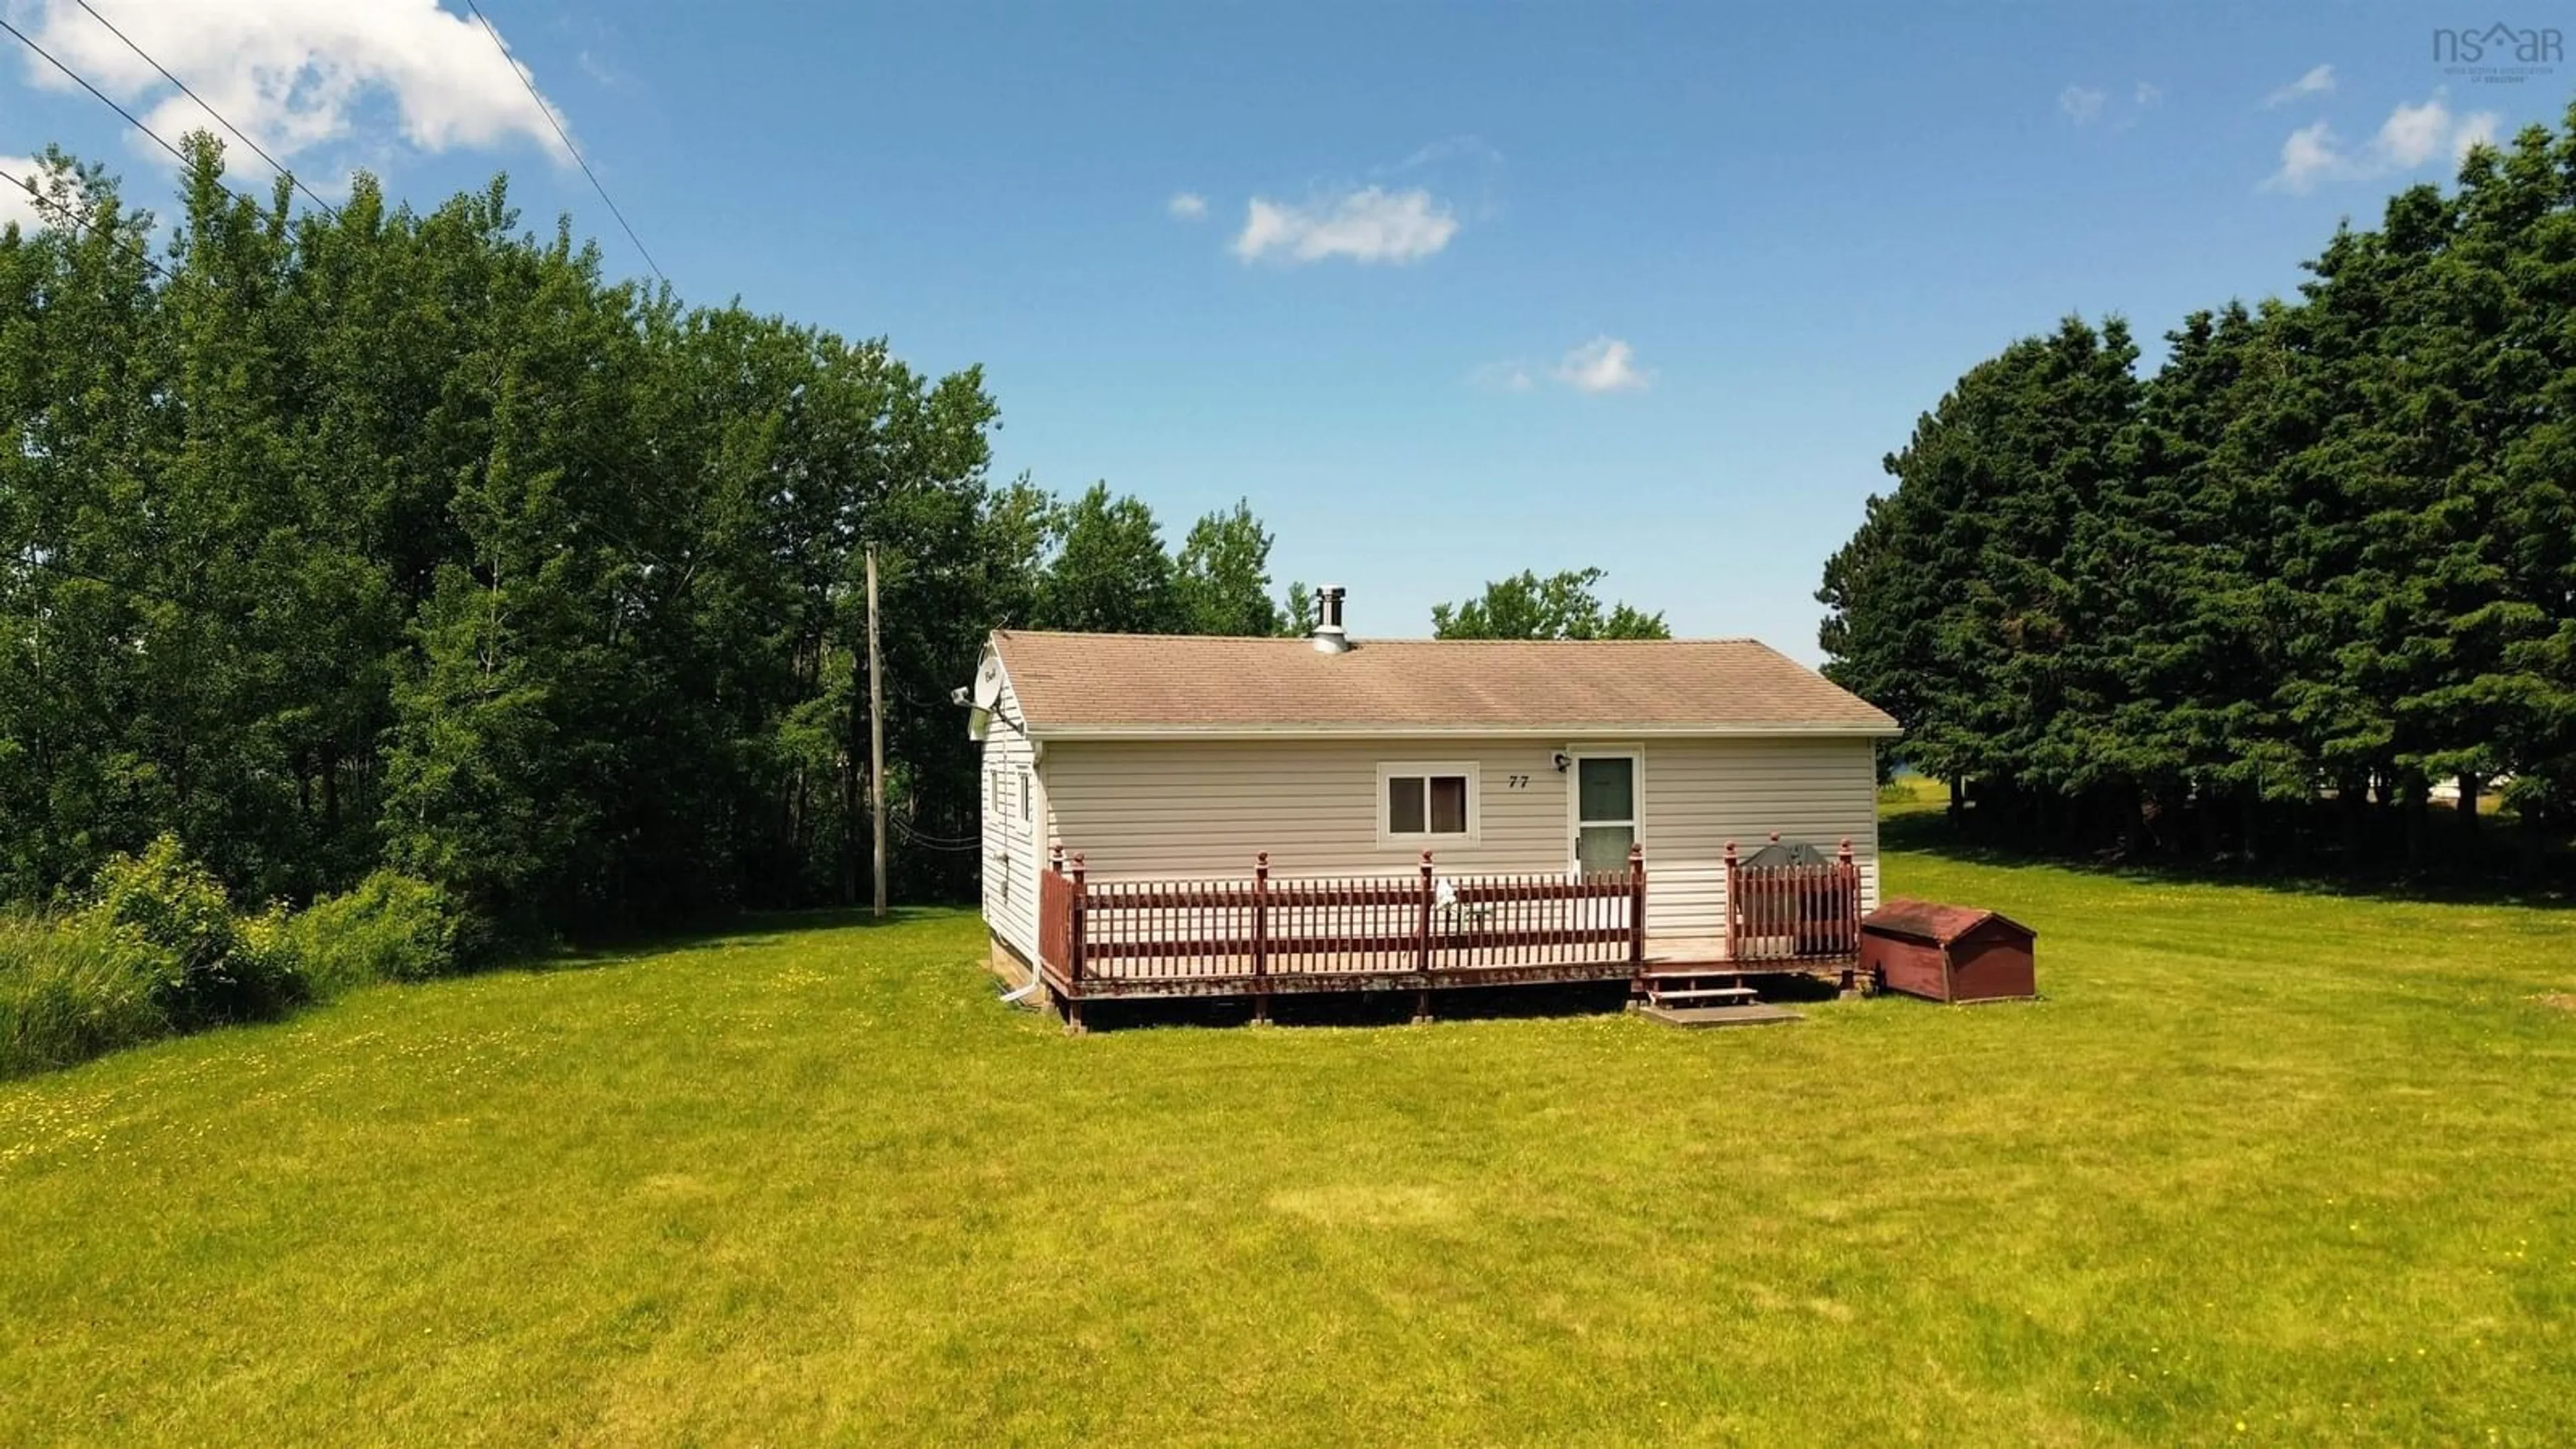 Shed for 77 Cold Spring Head Rd, Amherst Shore Nova Scotia B4H 3Y2